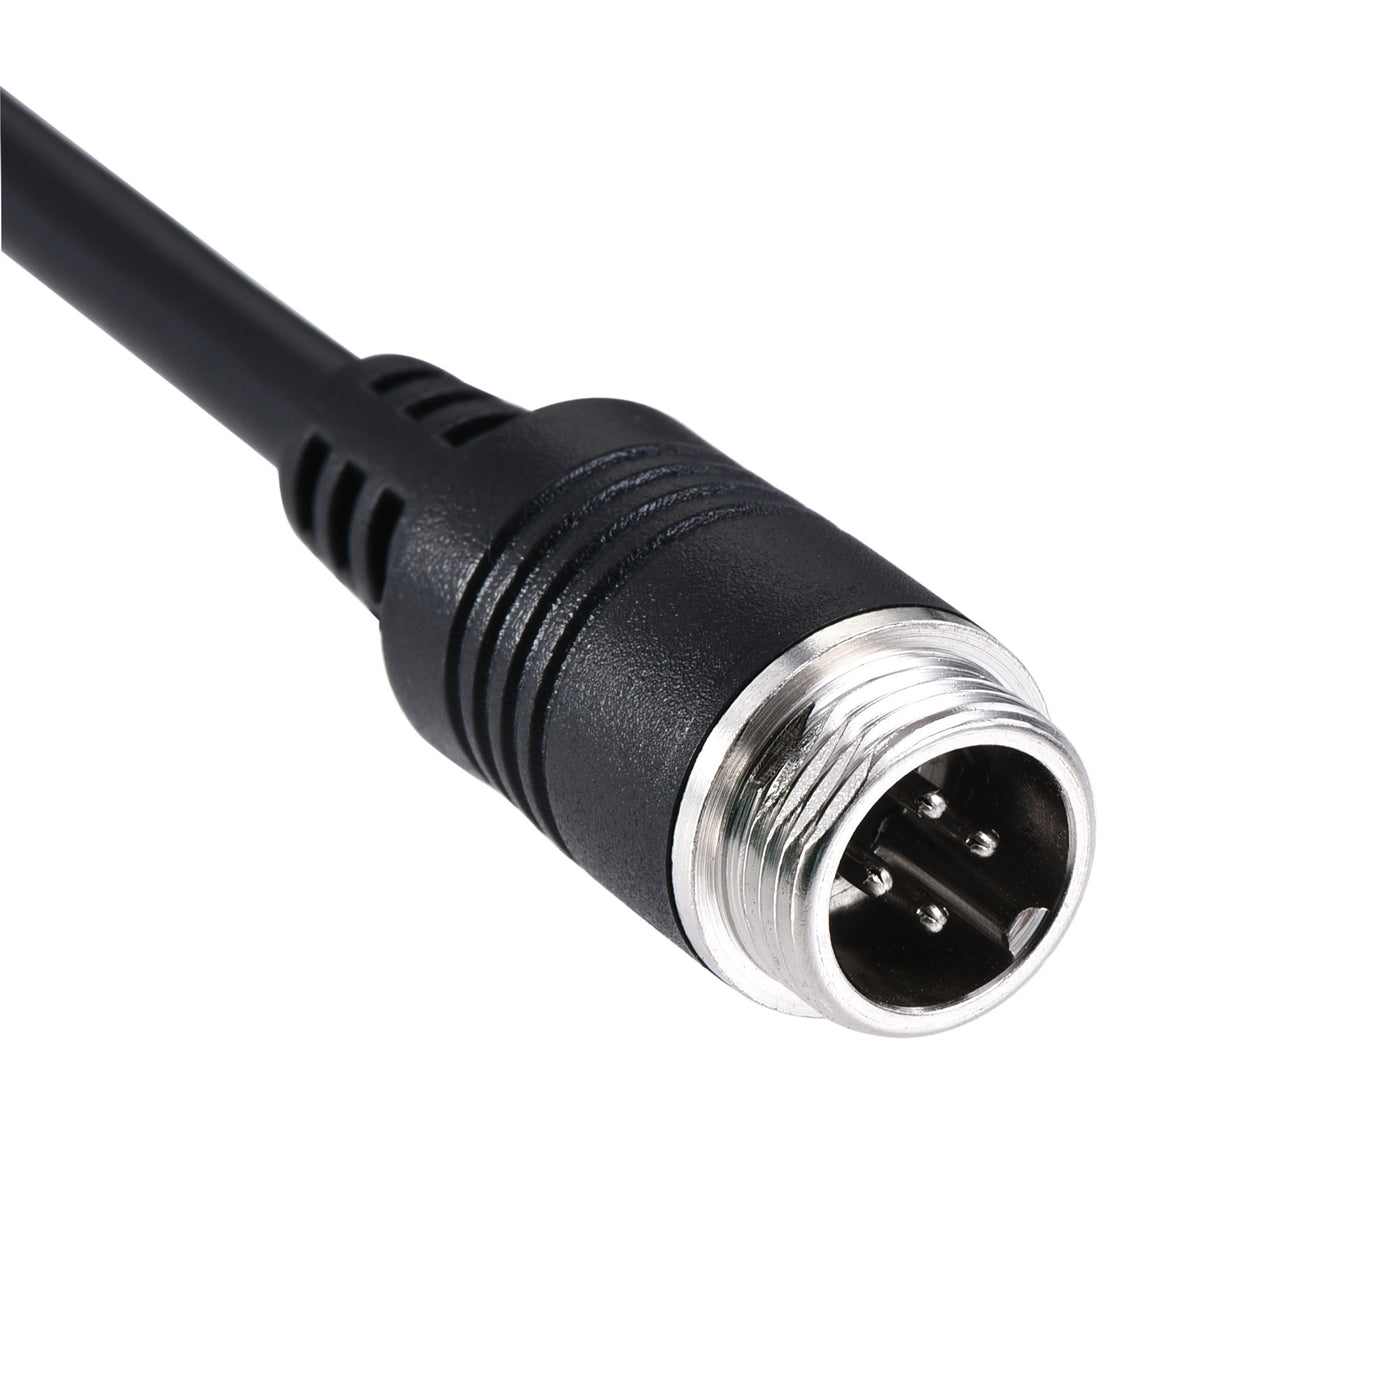 uxcell Uxcell Video Aviation Cable 4-Pin 65.62FT 20 Meters Male to Female Extension Cable